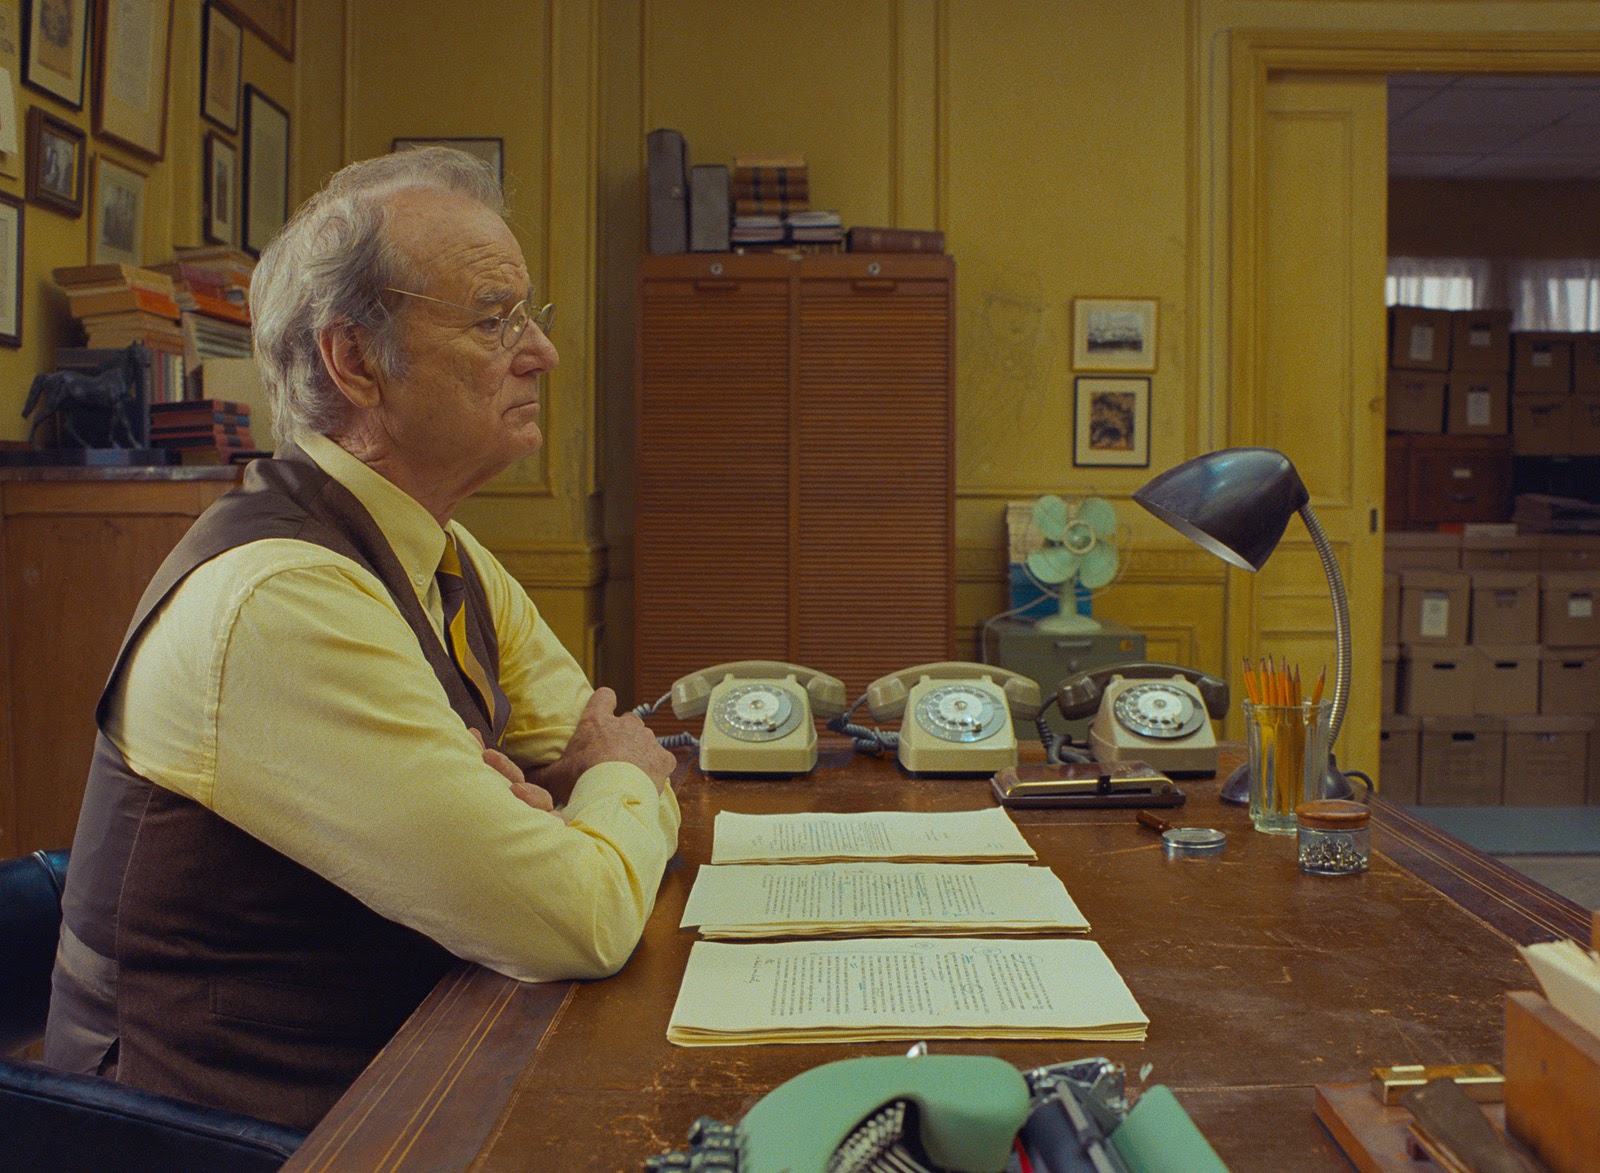 Bill Murray as Arthur Howitzer Jr., editor of The French Dispatch (which is loosely based on The New Yorker). Image © Searchlight Pictures